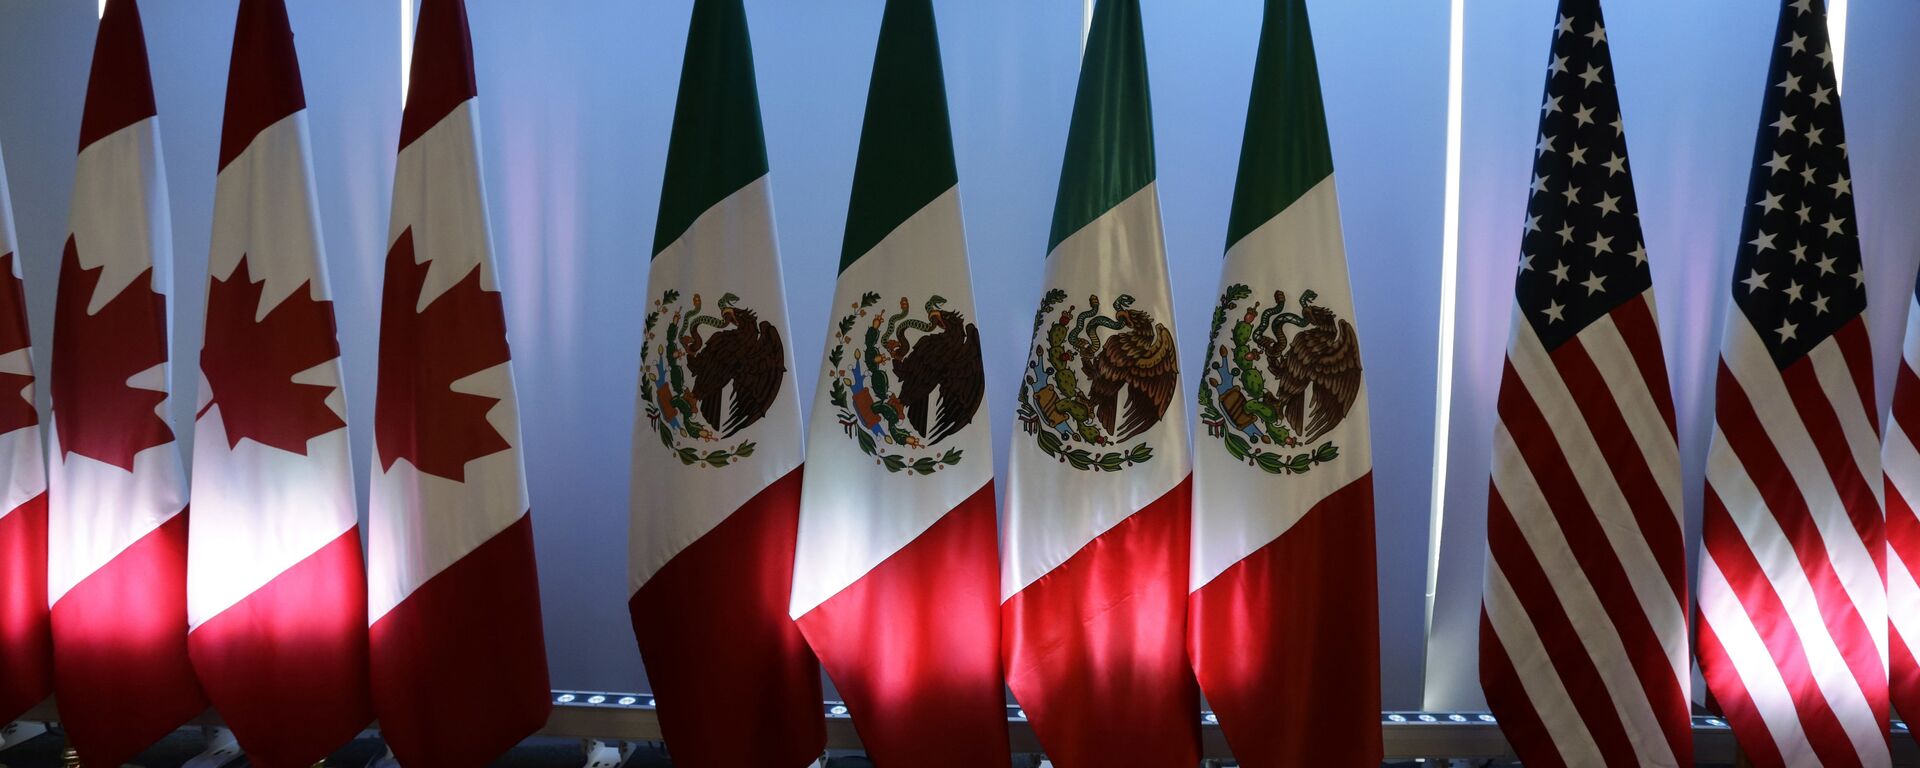 National flags representing Canada, Mexico, and the US are lit by stage lights at the North American Free Trade Agreement, NAFTA, renegotiations, in Mexico City, Tuesday, Sept. 5, 2017. - Sputnik International, 1920, 02.10.2018